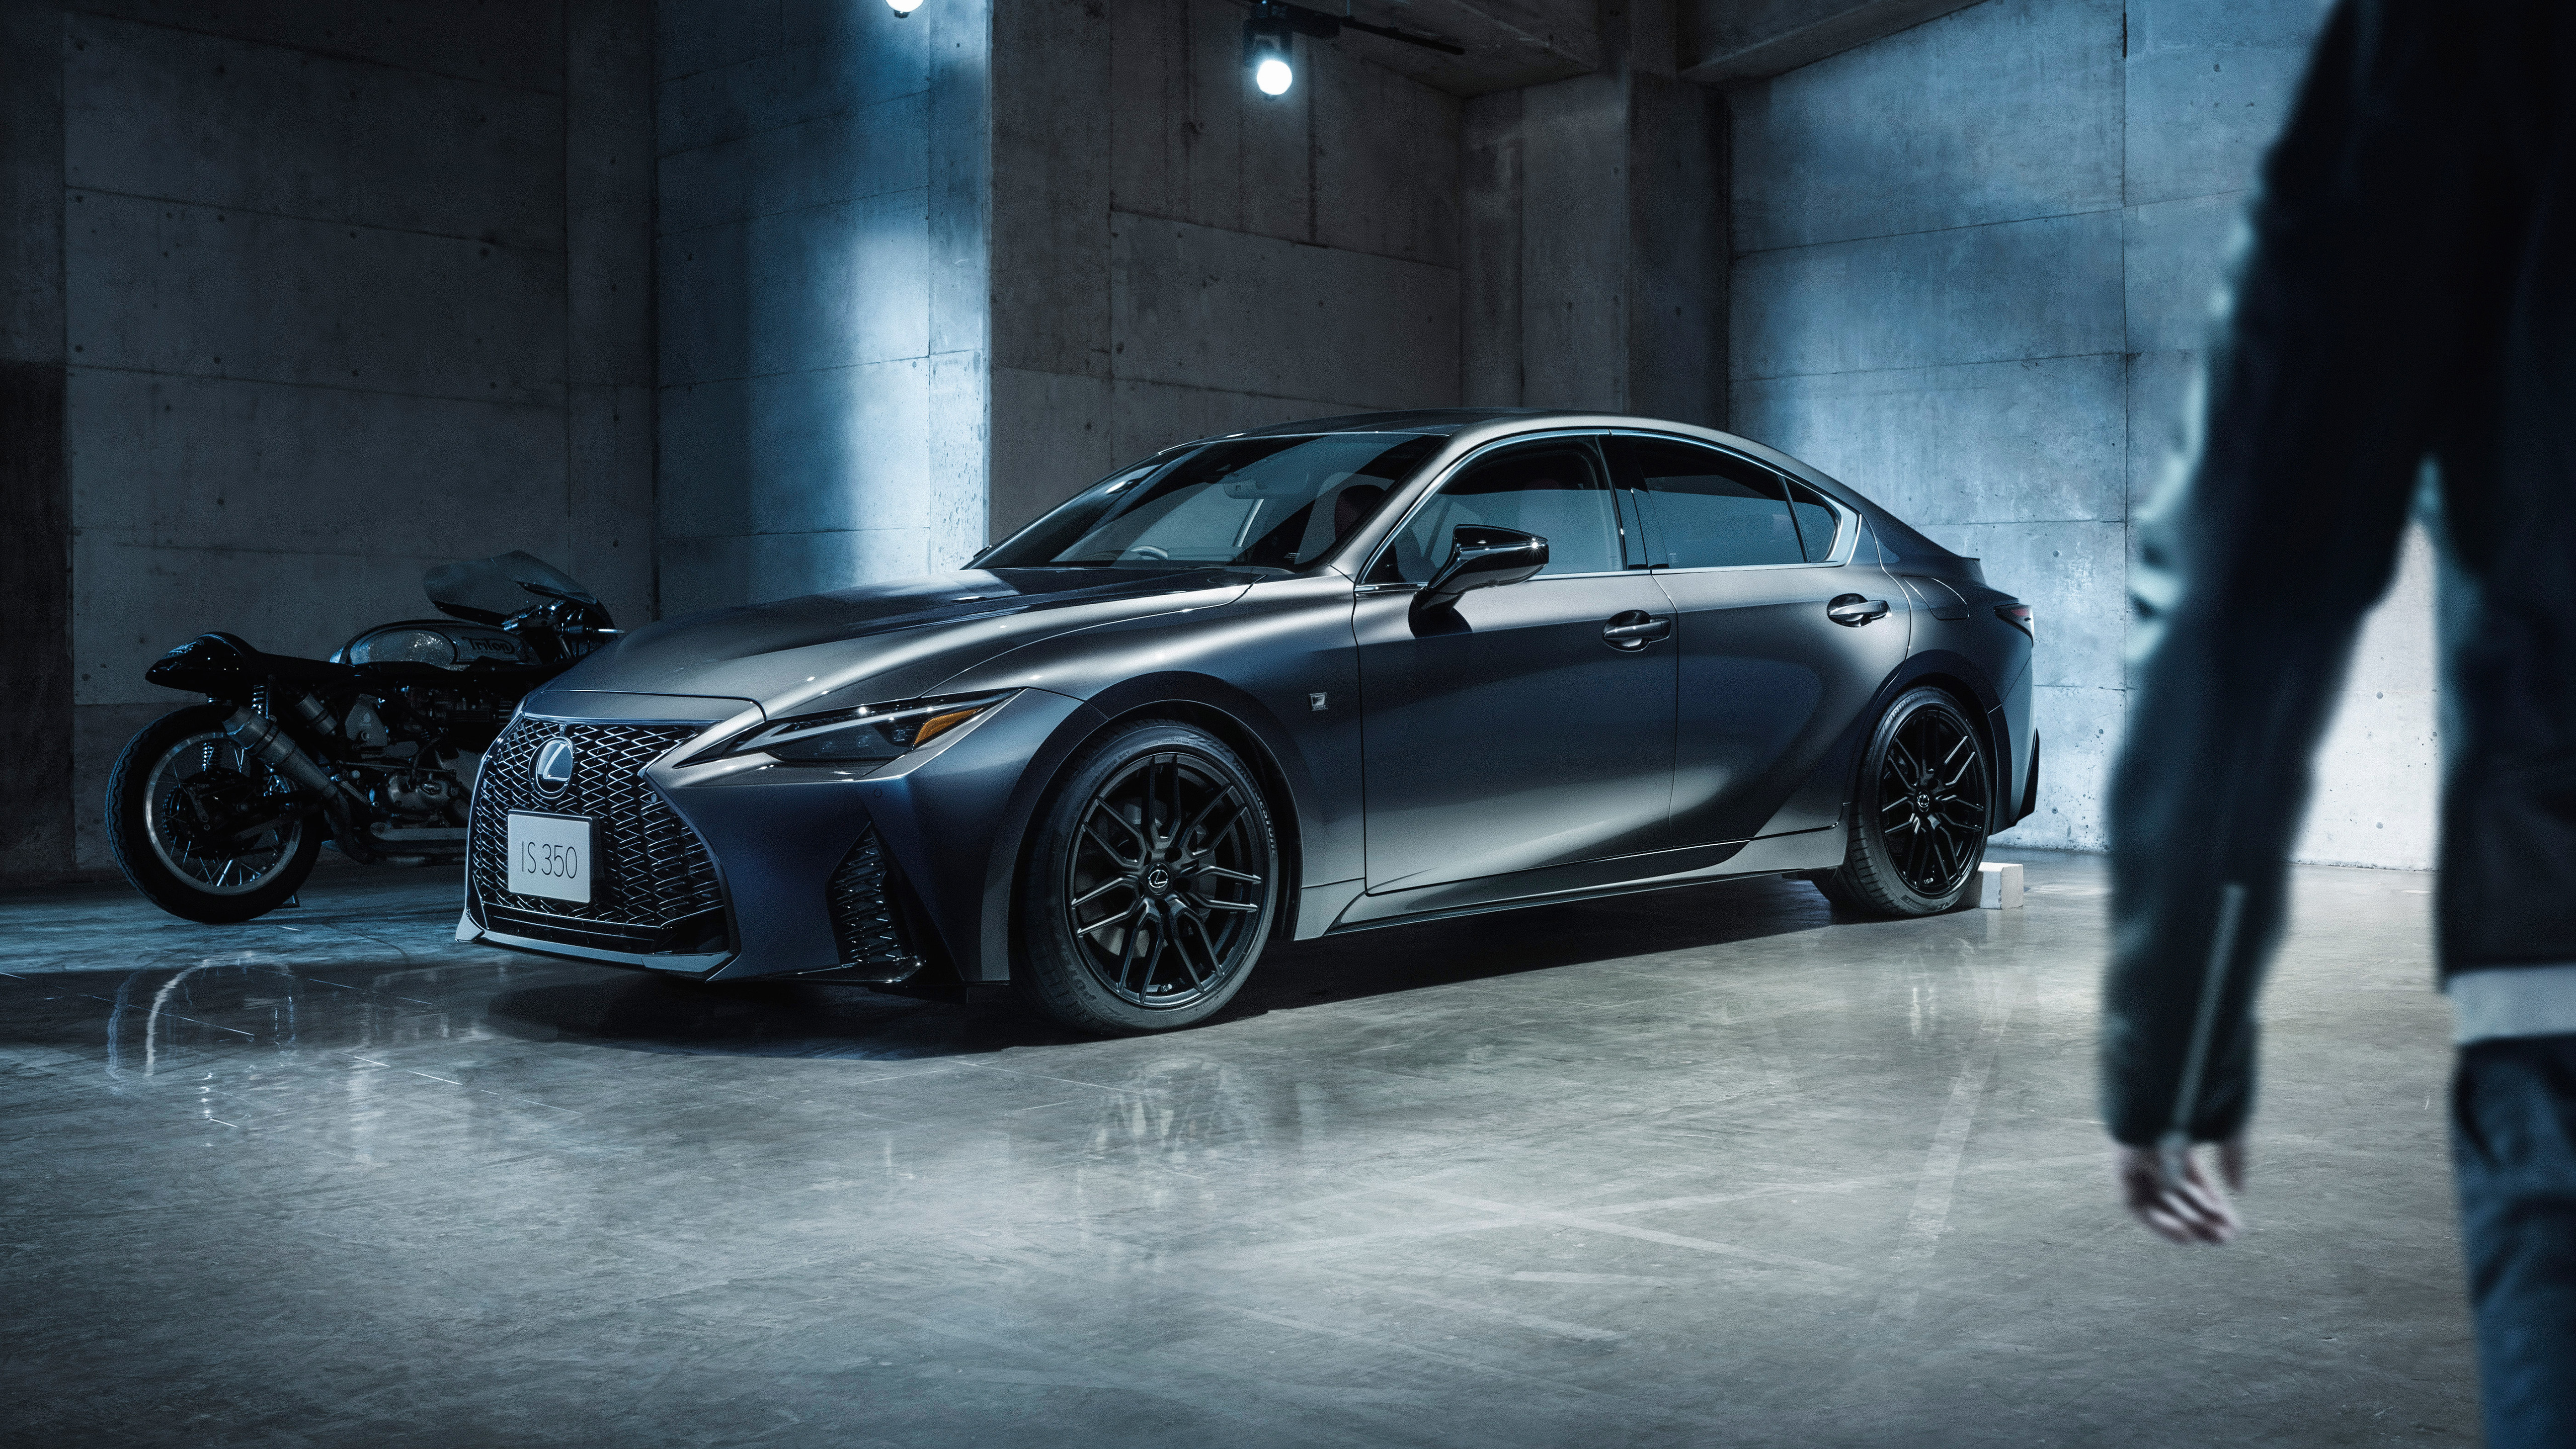 2021 Lexus Is 350 F Sport Silver In Garage Wallpapers And Images Wallpapers Pictures Photos